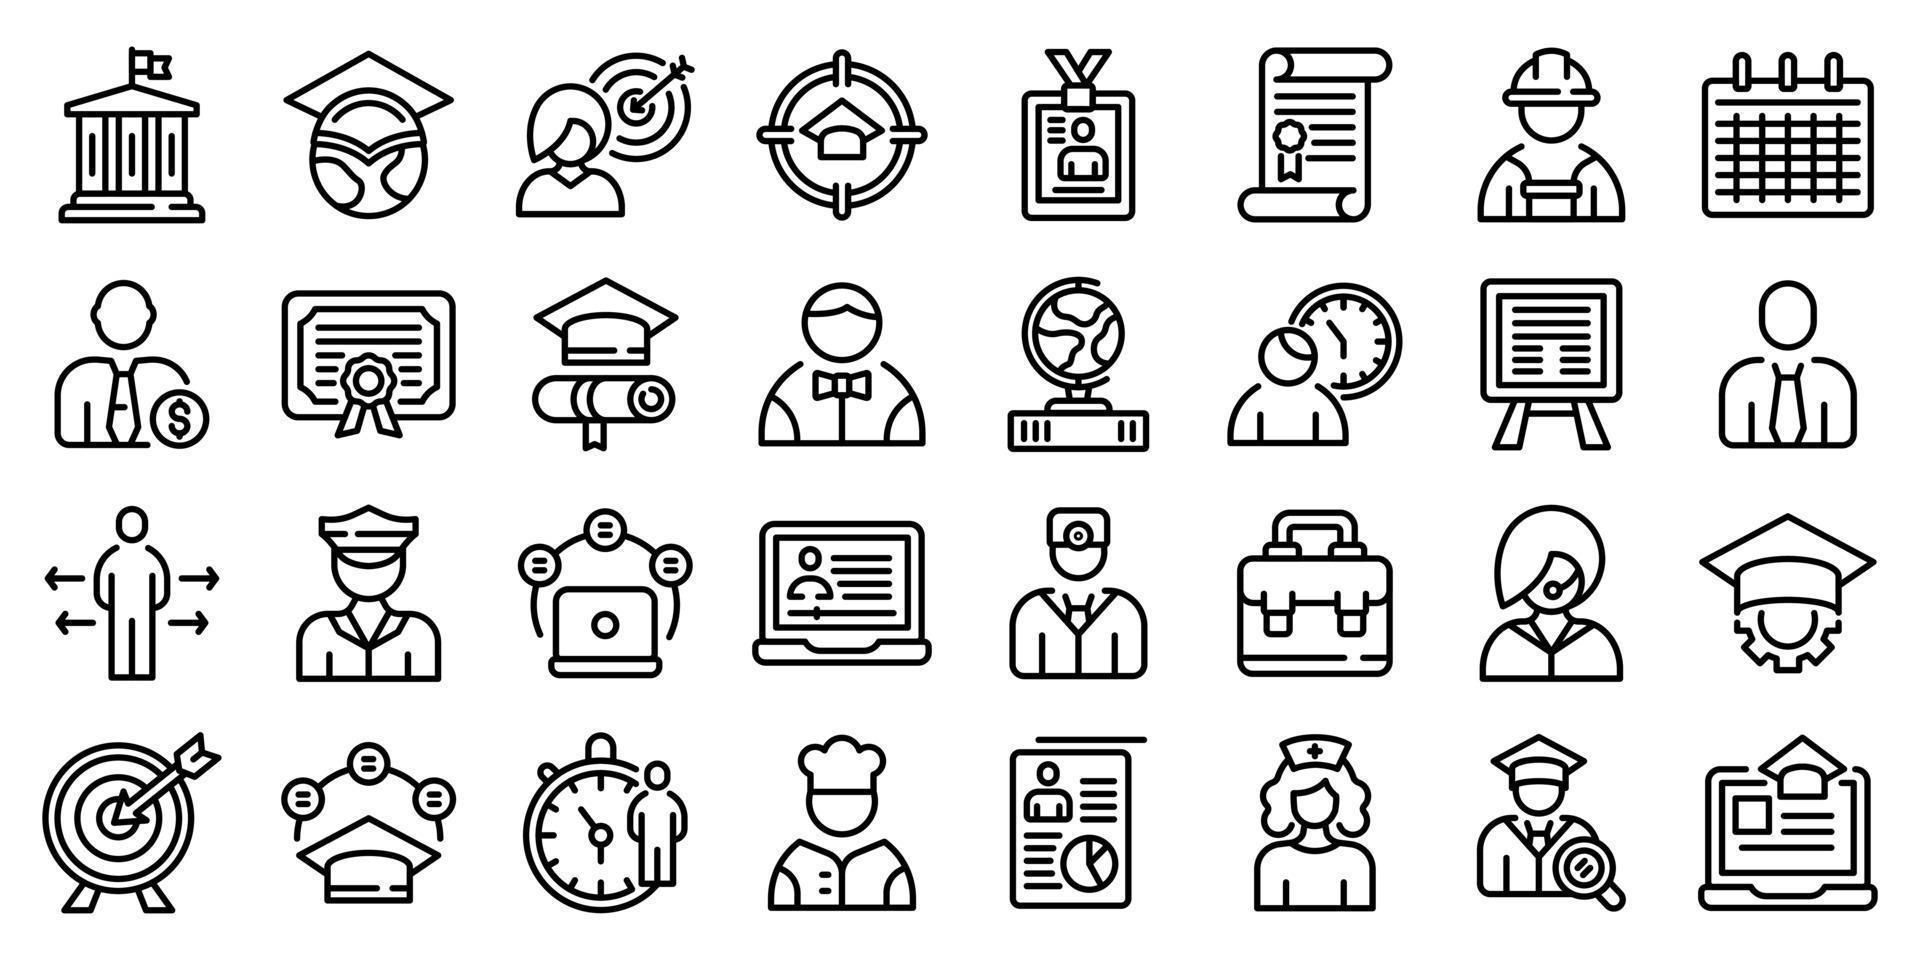 Job students icons set, outline style vector